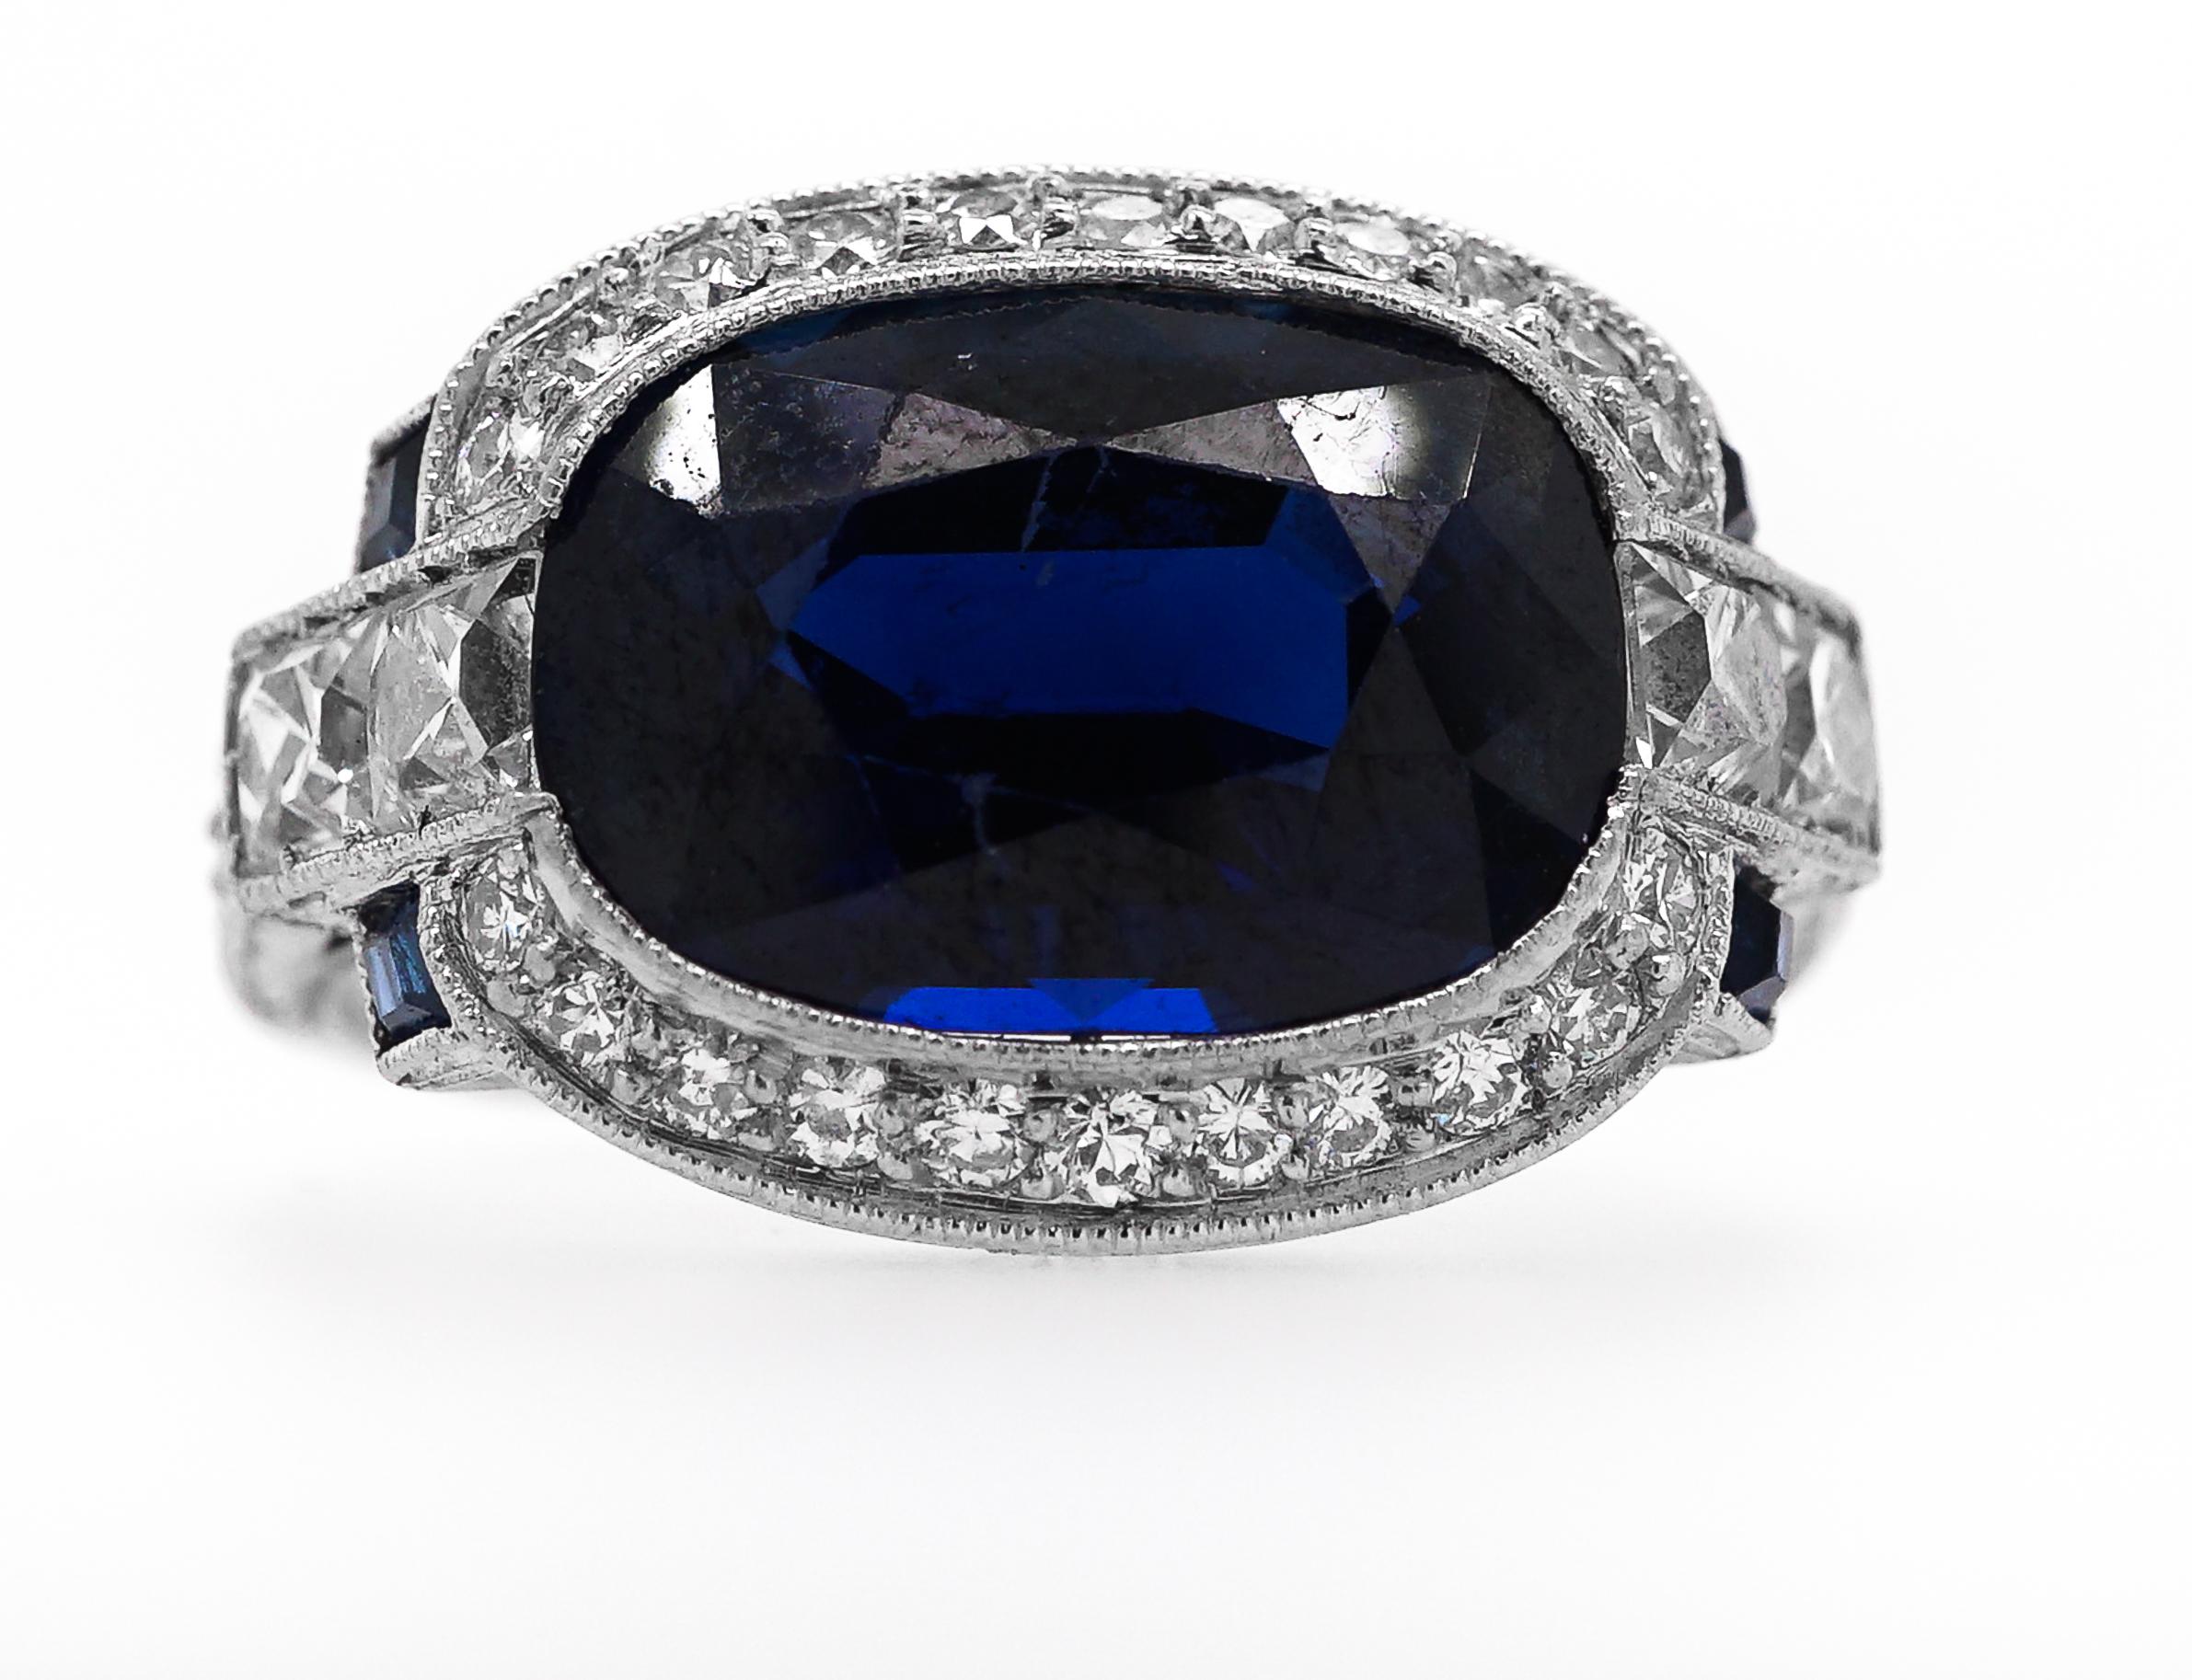 This item features one centered cushion-shaped sapphire approximately 3.75 cts., flanked by four French-cut diamonds approximately .30 ct and four small square-cut sapphires framed and flanked by 26 small round diamonds, circa 1930. Size 4 3/4. GIA